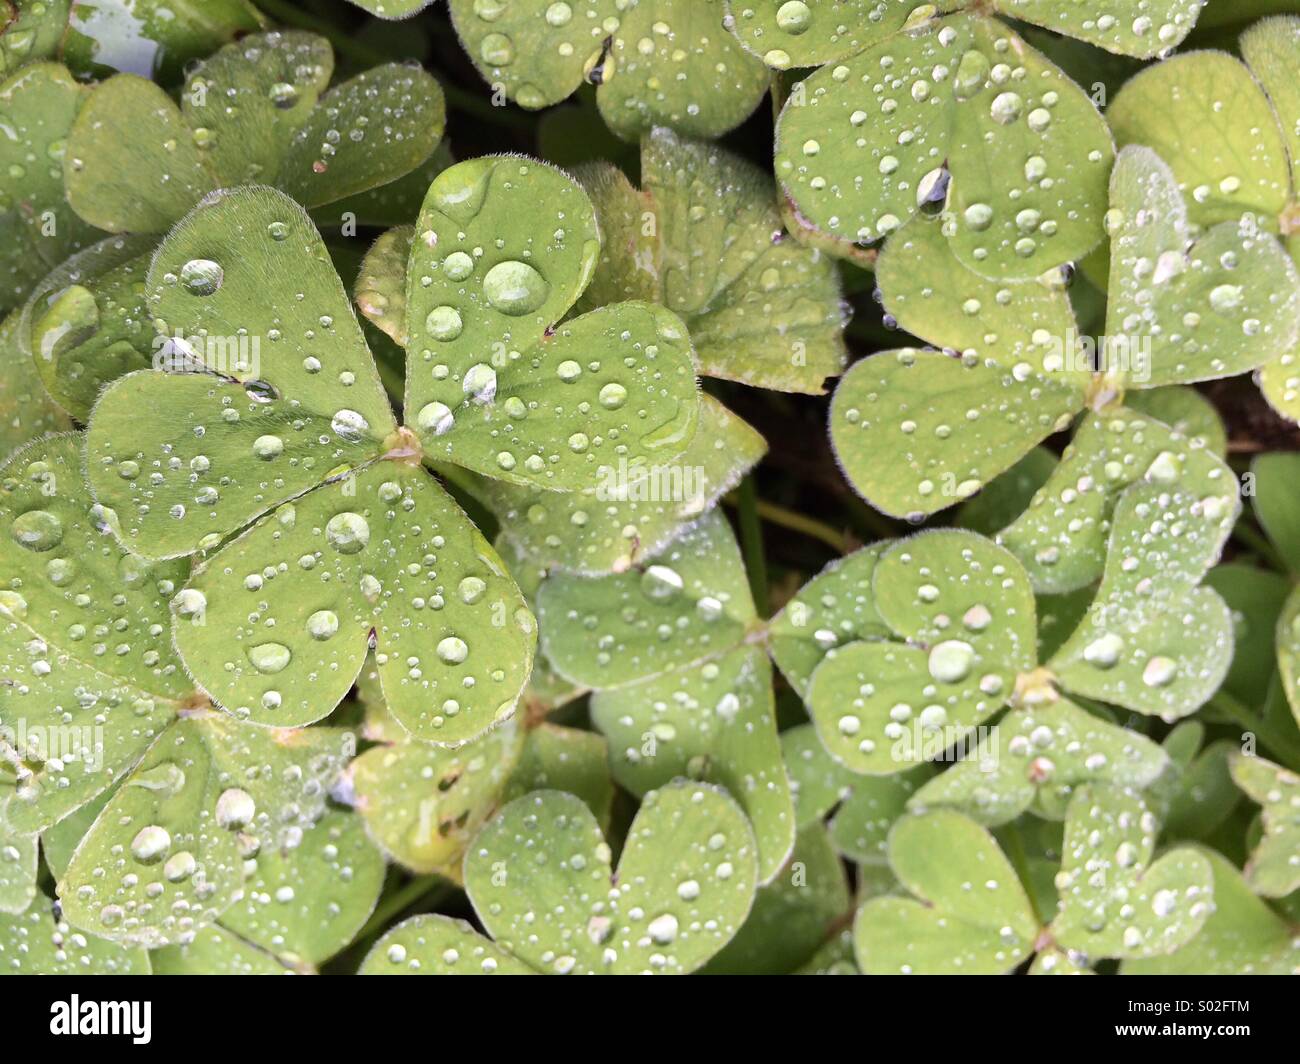 Clover and dewdrops Stock Photo